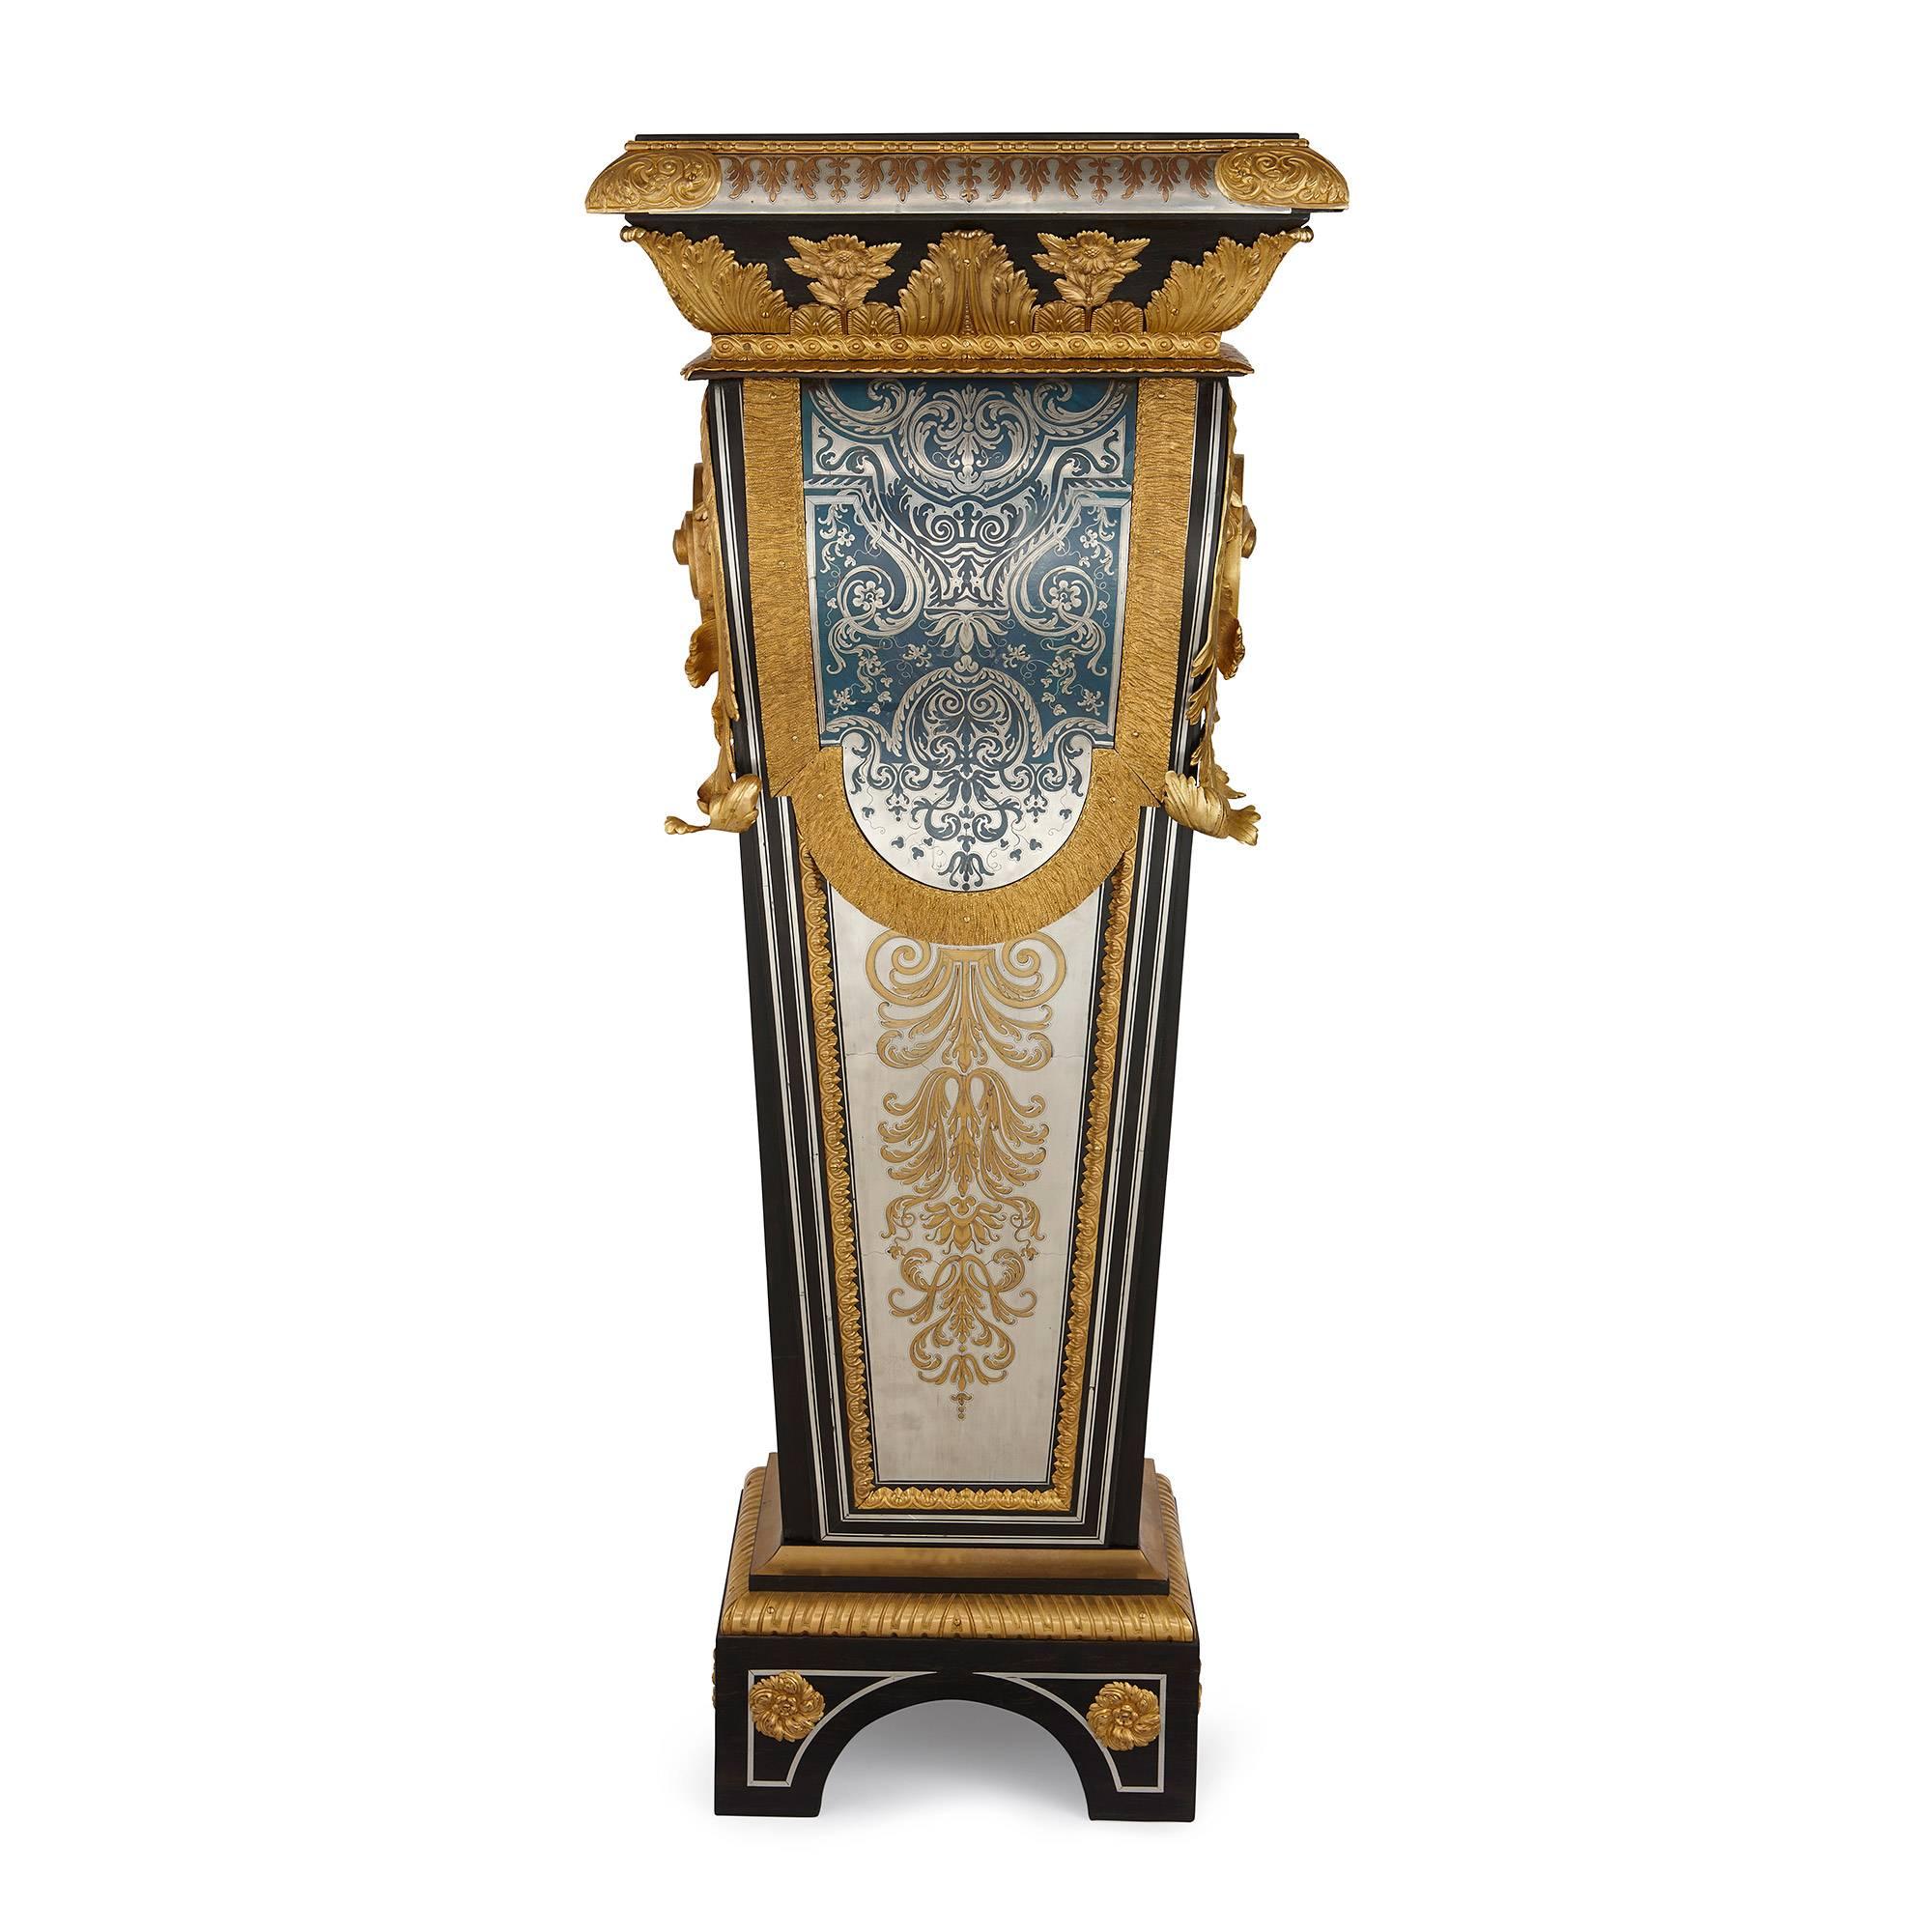 Of rectangular form with ebony, ebonized wood, inlaid pewter, brass and tinted blue horn mounted with fine quality ormolu mounts, elaborately decorated with geometric designs, flanked on the sides with large ormolu acanthus scrolls, on arched